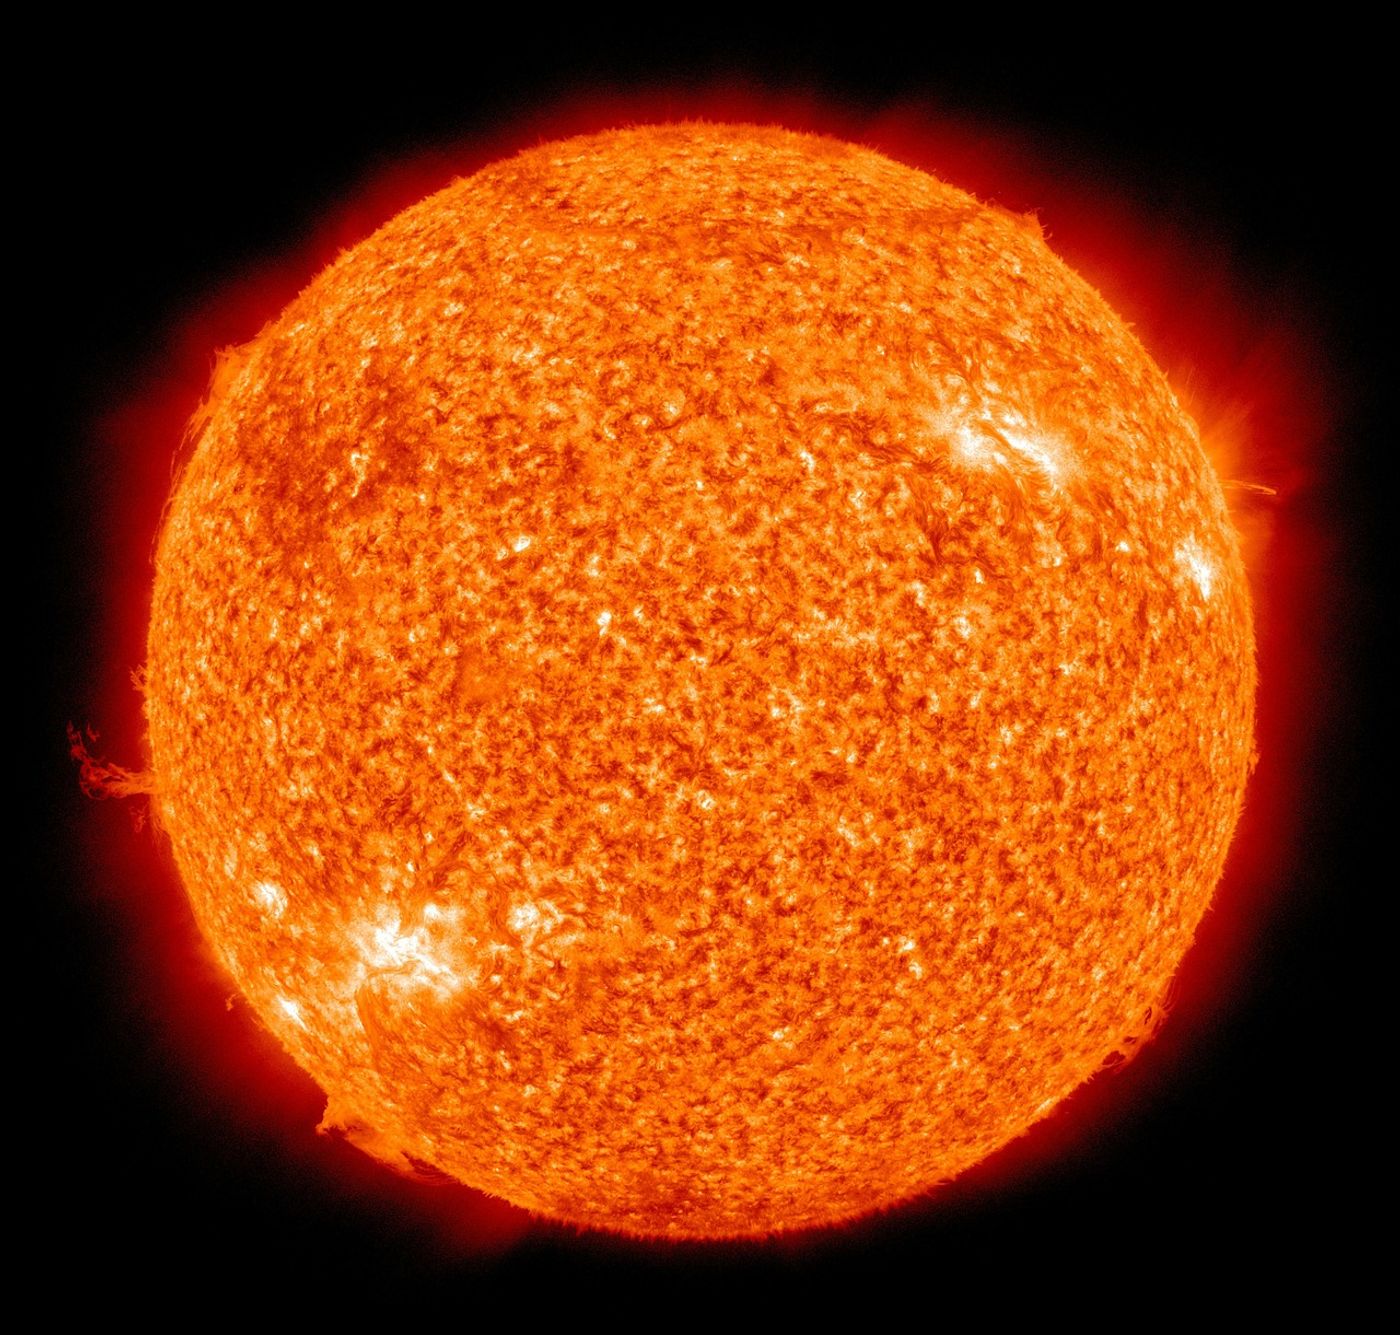 Is the Sun really as different from other Sun-like stars as we originally thought?